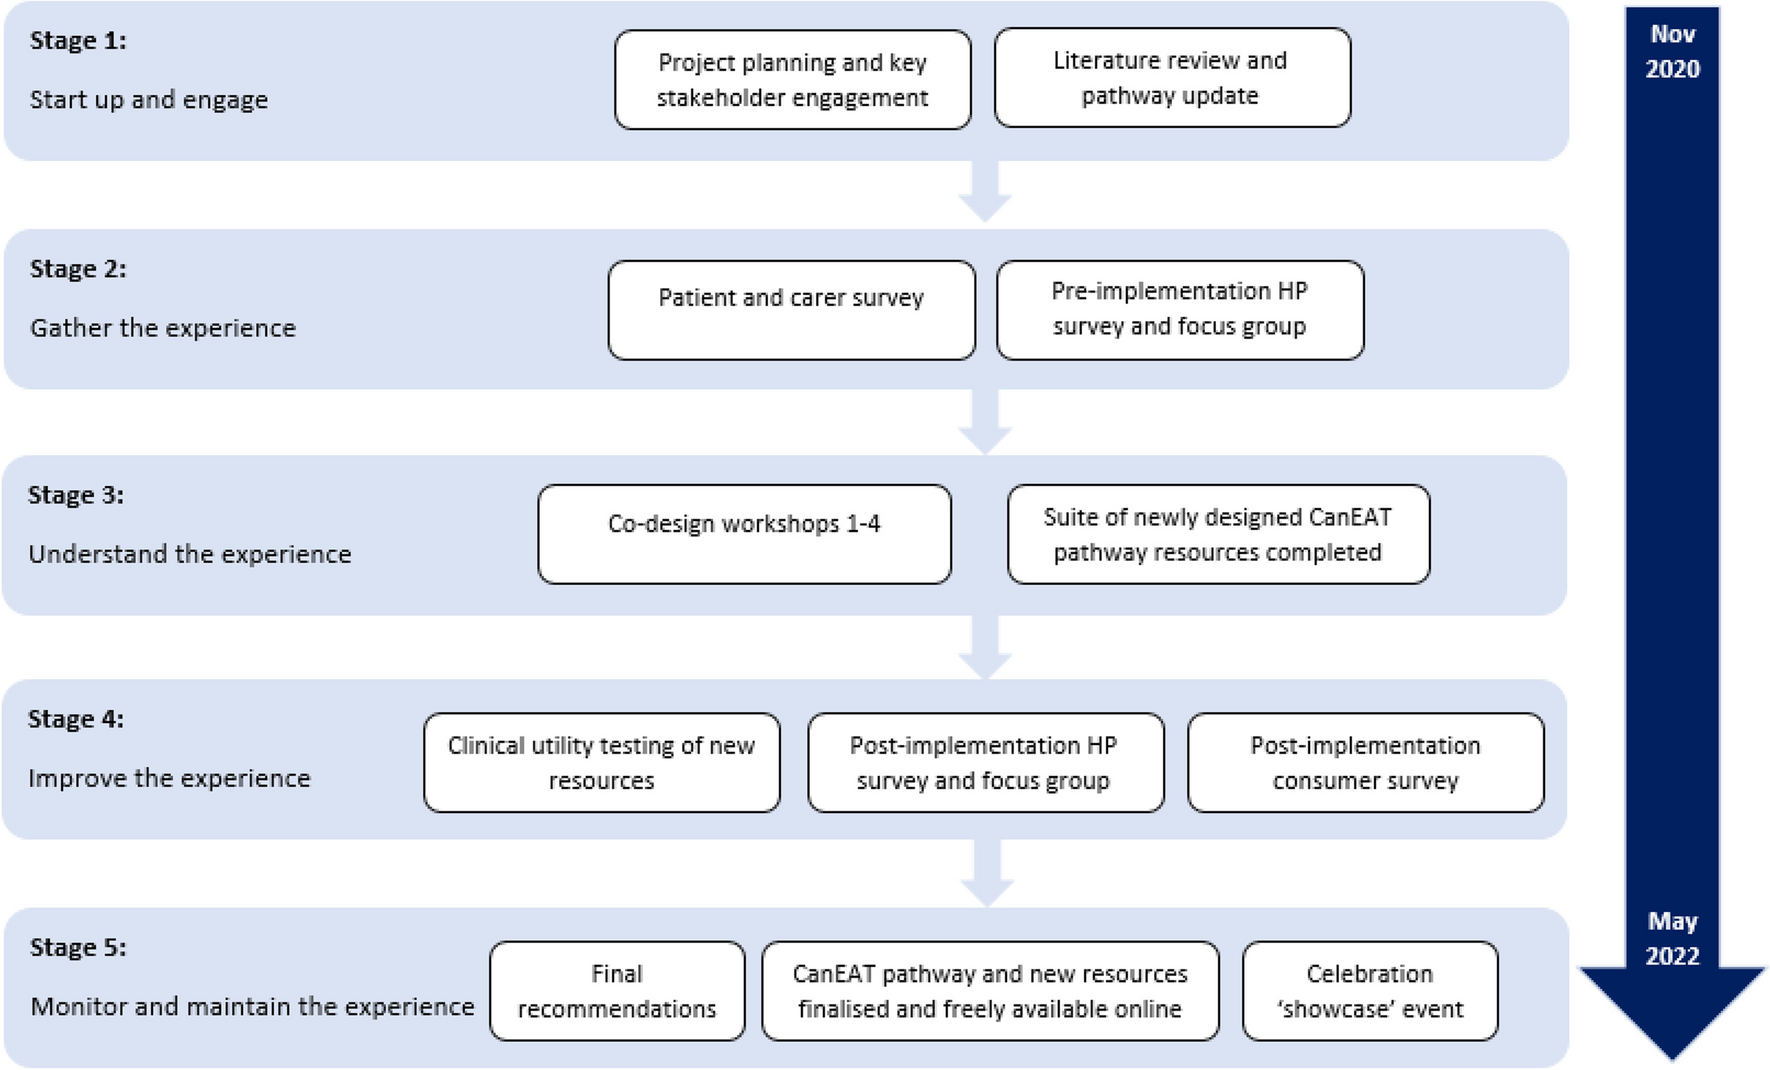 Enhancing the provision of cancer nutrition information to support care through experience-based co-design: a mixed-methods study